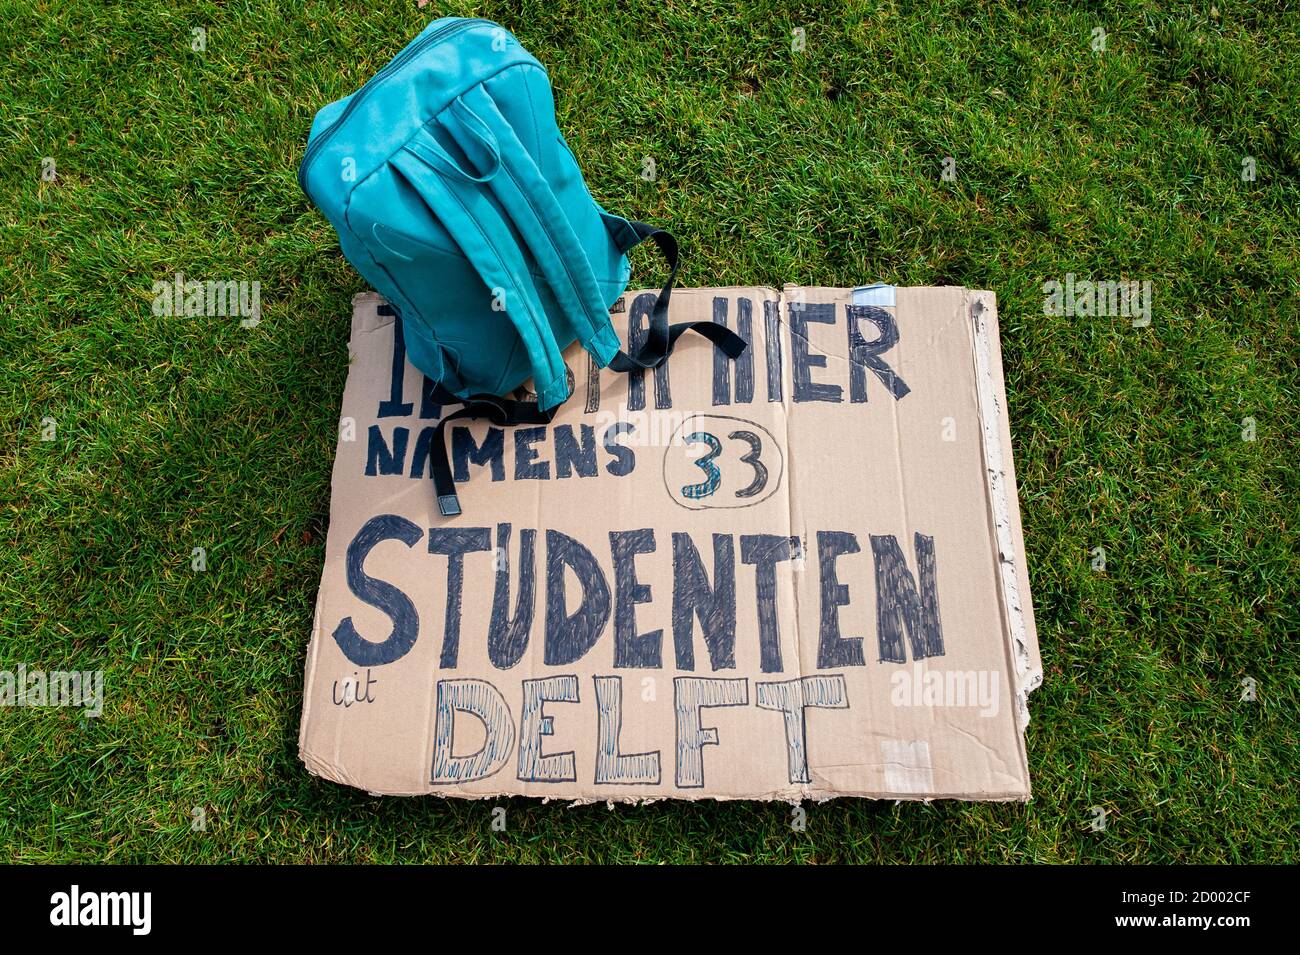 A backpack lies on the ground next to a placard during the demonstration.Due to the measures against Covid-19, only 10 to 30 percent of education takes place in Schools. Some students don’t get to visit their campus at all, and teachers are struggling to digitalize their courses. Because of that, the Amsterdam student unions ASVA and SRVU, the National Student Union together with the #ikwilaansschool action group organized a protest to demand financial resources to provide safe physical education. Students and teachers gathered at the Museumplein holding placards in representation of students Stock Photo